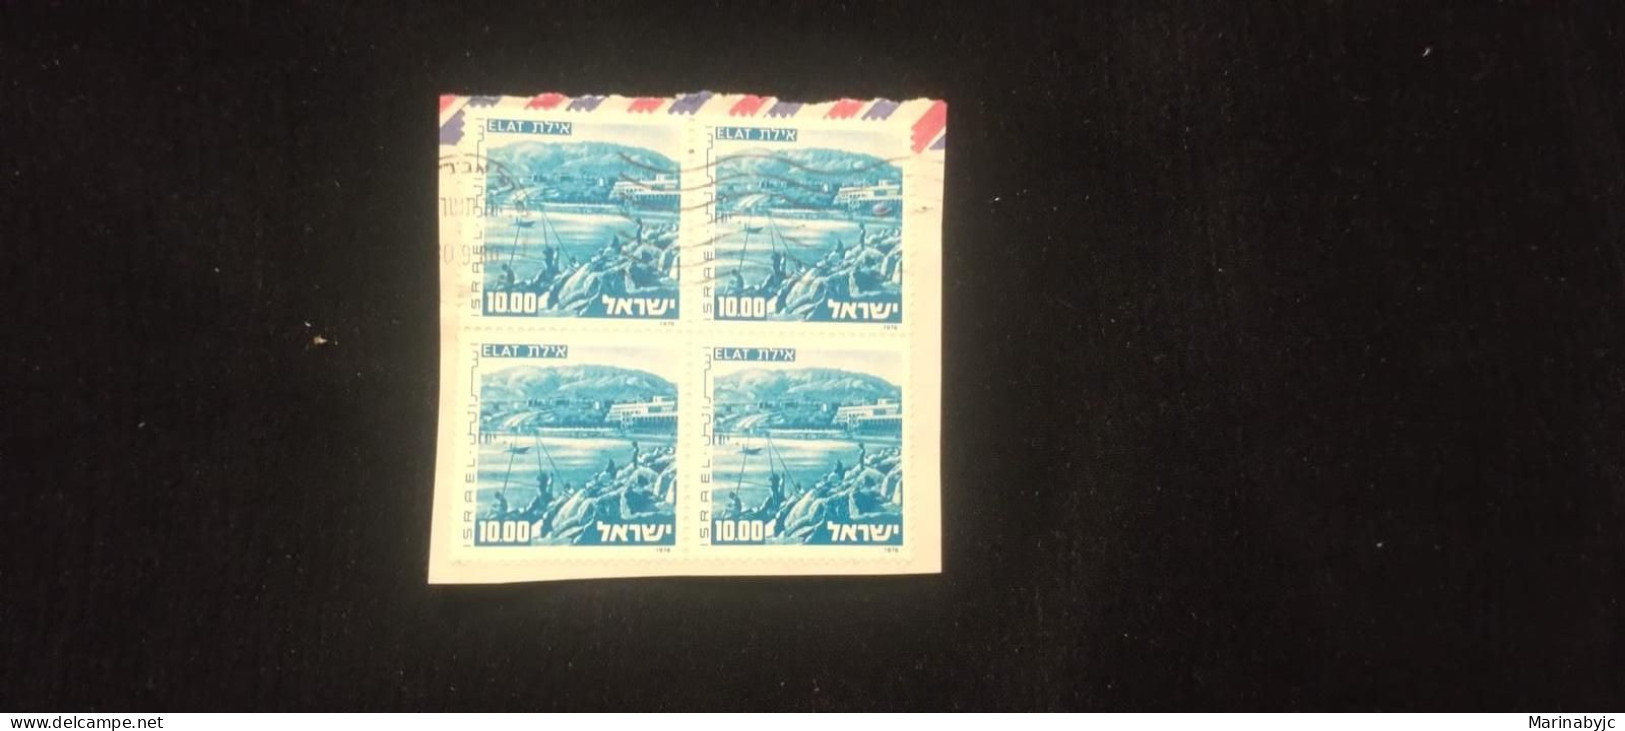 C) 675. 1976. ISRAEL. ELAT. YD. USED. BLOCK OF 4 STAMPS, IN AIR MAIL ENVELOPE. USED - Asia (Other)